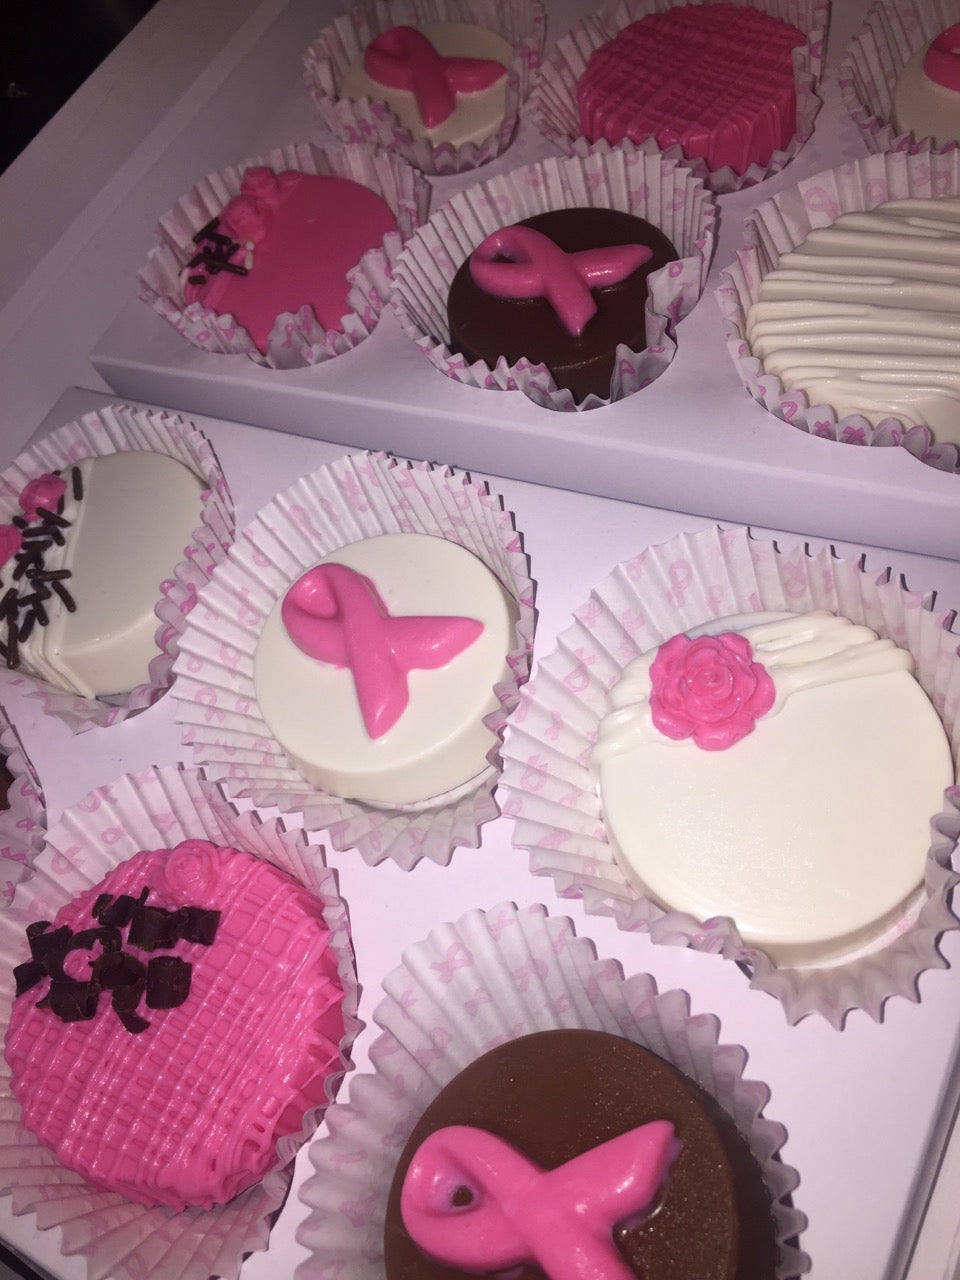 Oreo Cookies - Chocolate Covered/Dipped (Breast Cancer)